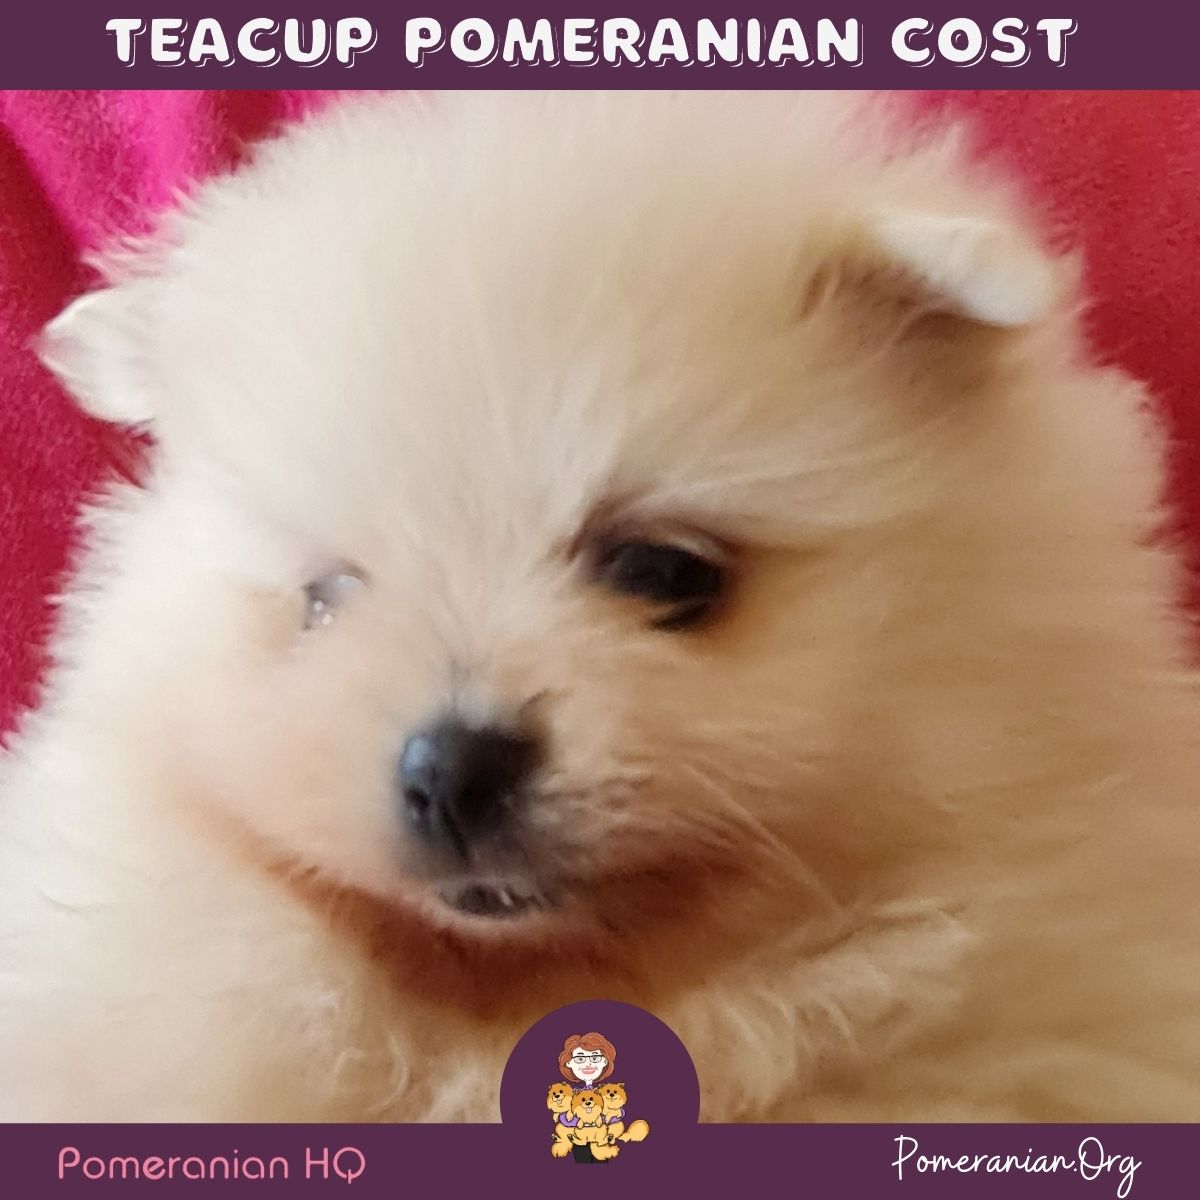 How Much Does a Teacup Pomeranian Cost